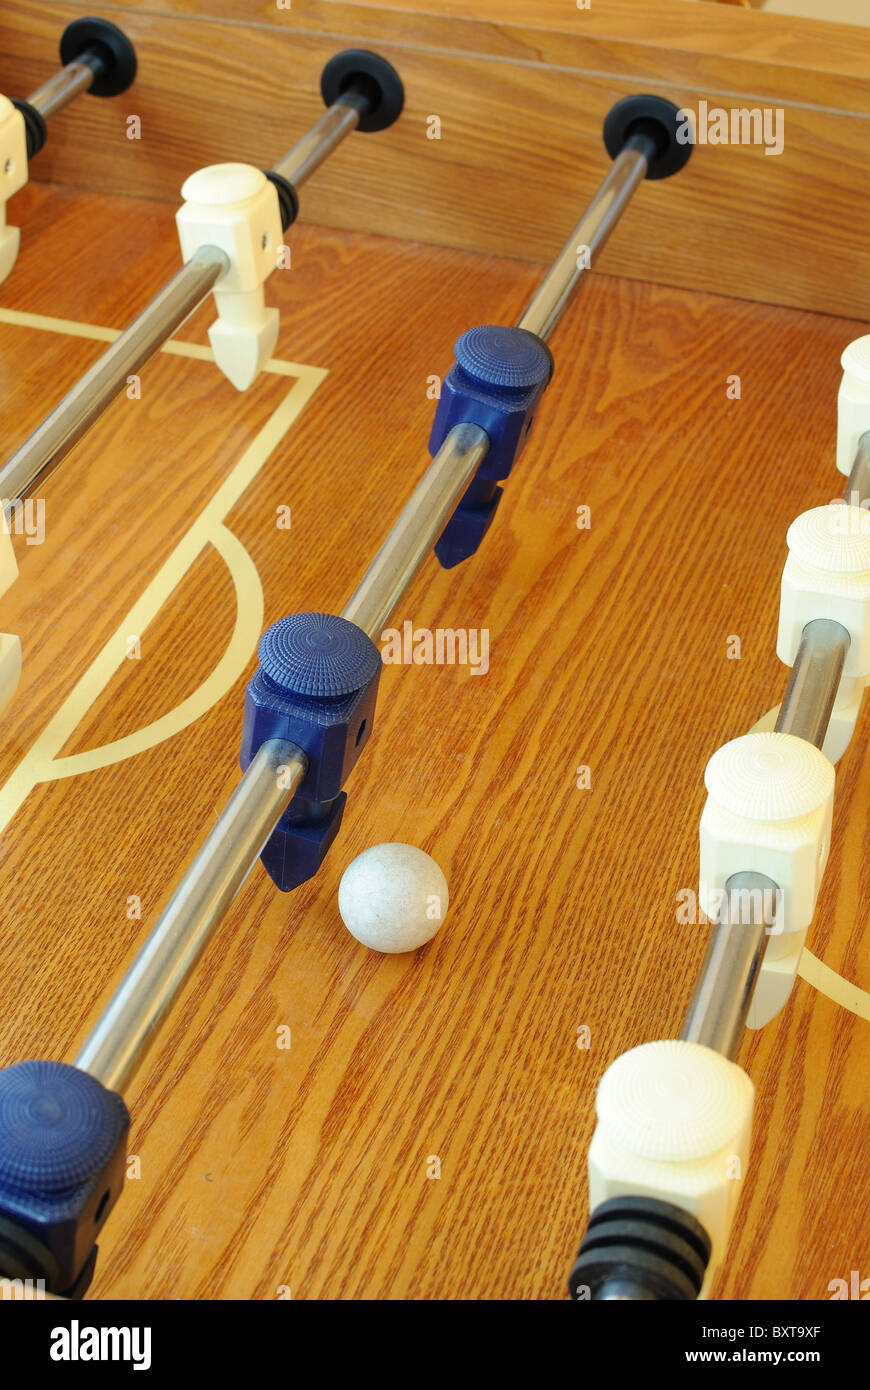 Foosball table in a carpeted room Stock Photo